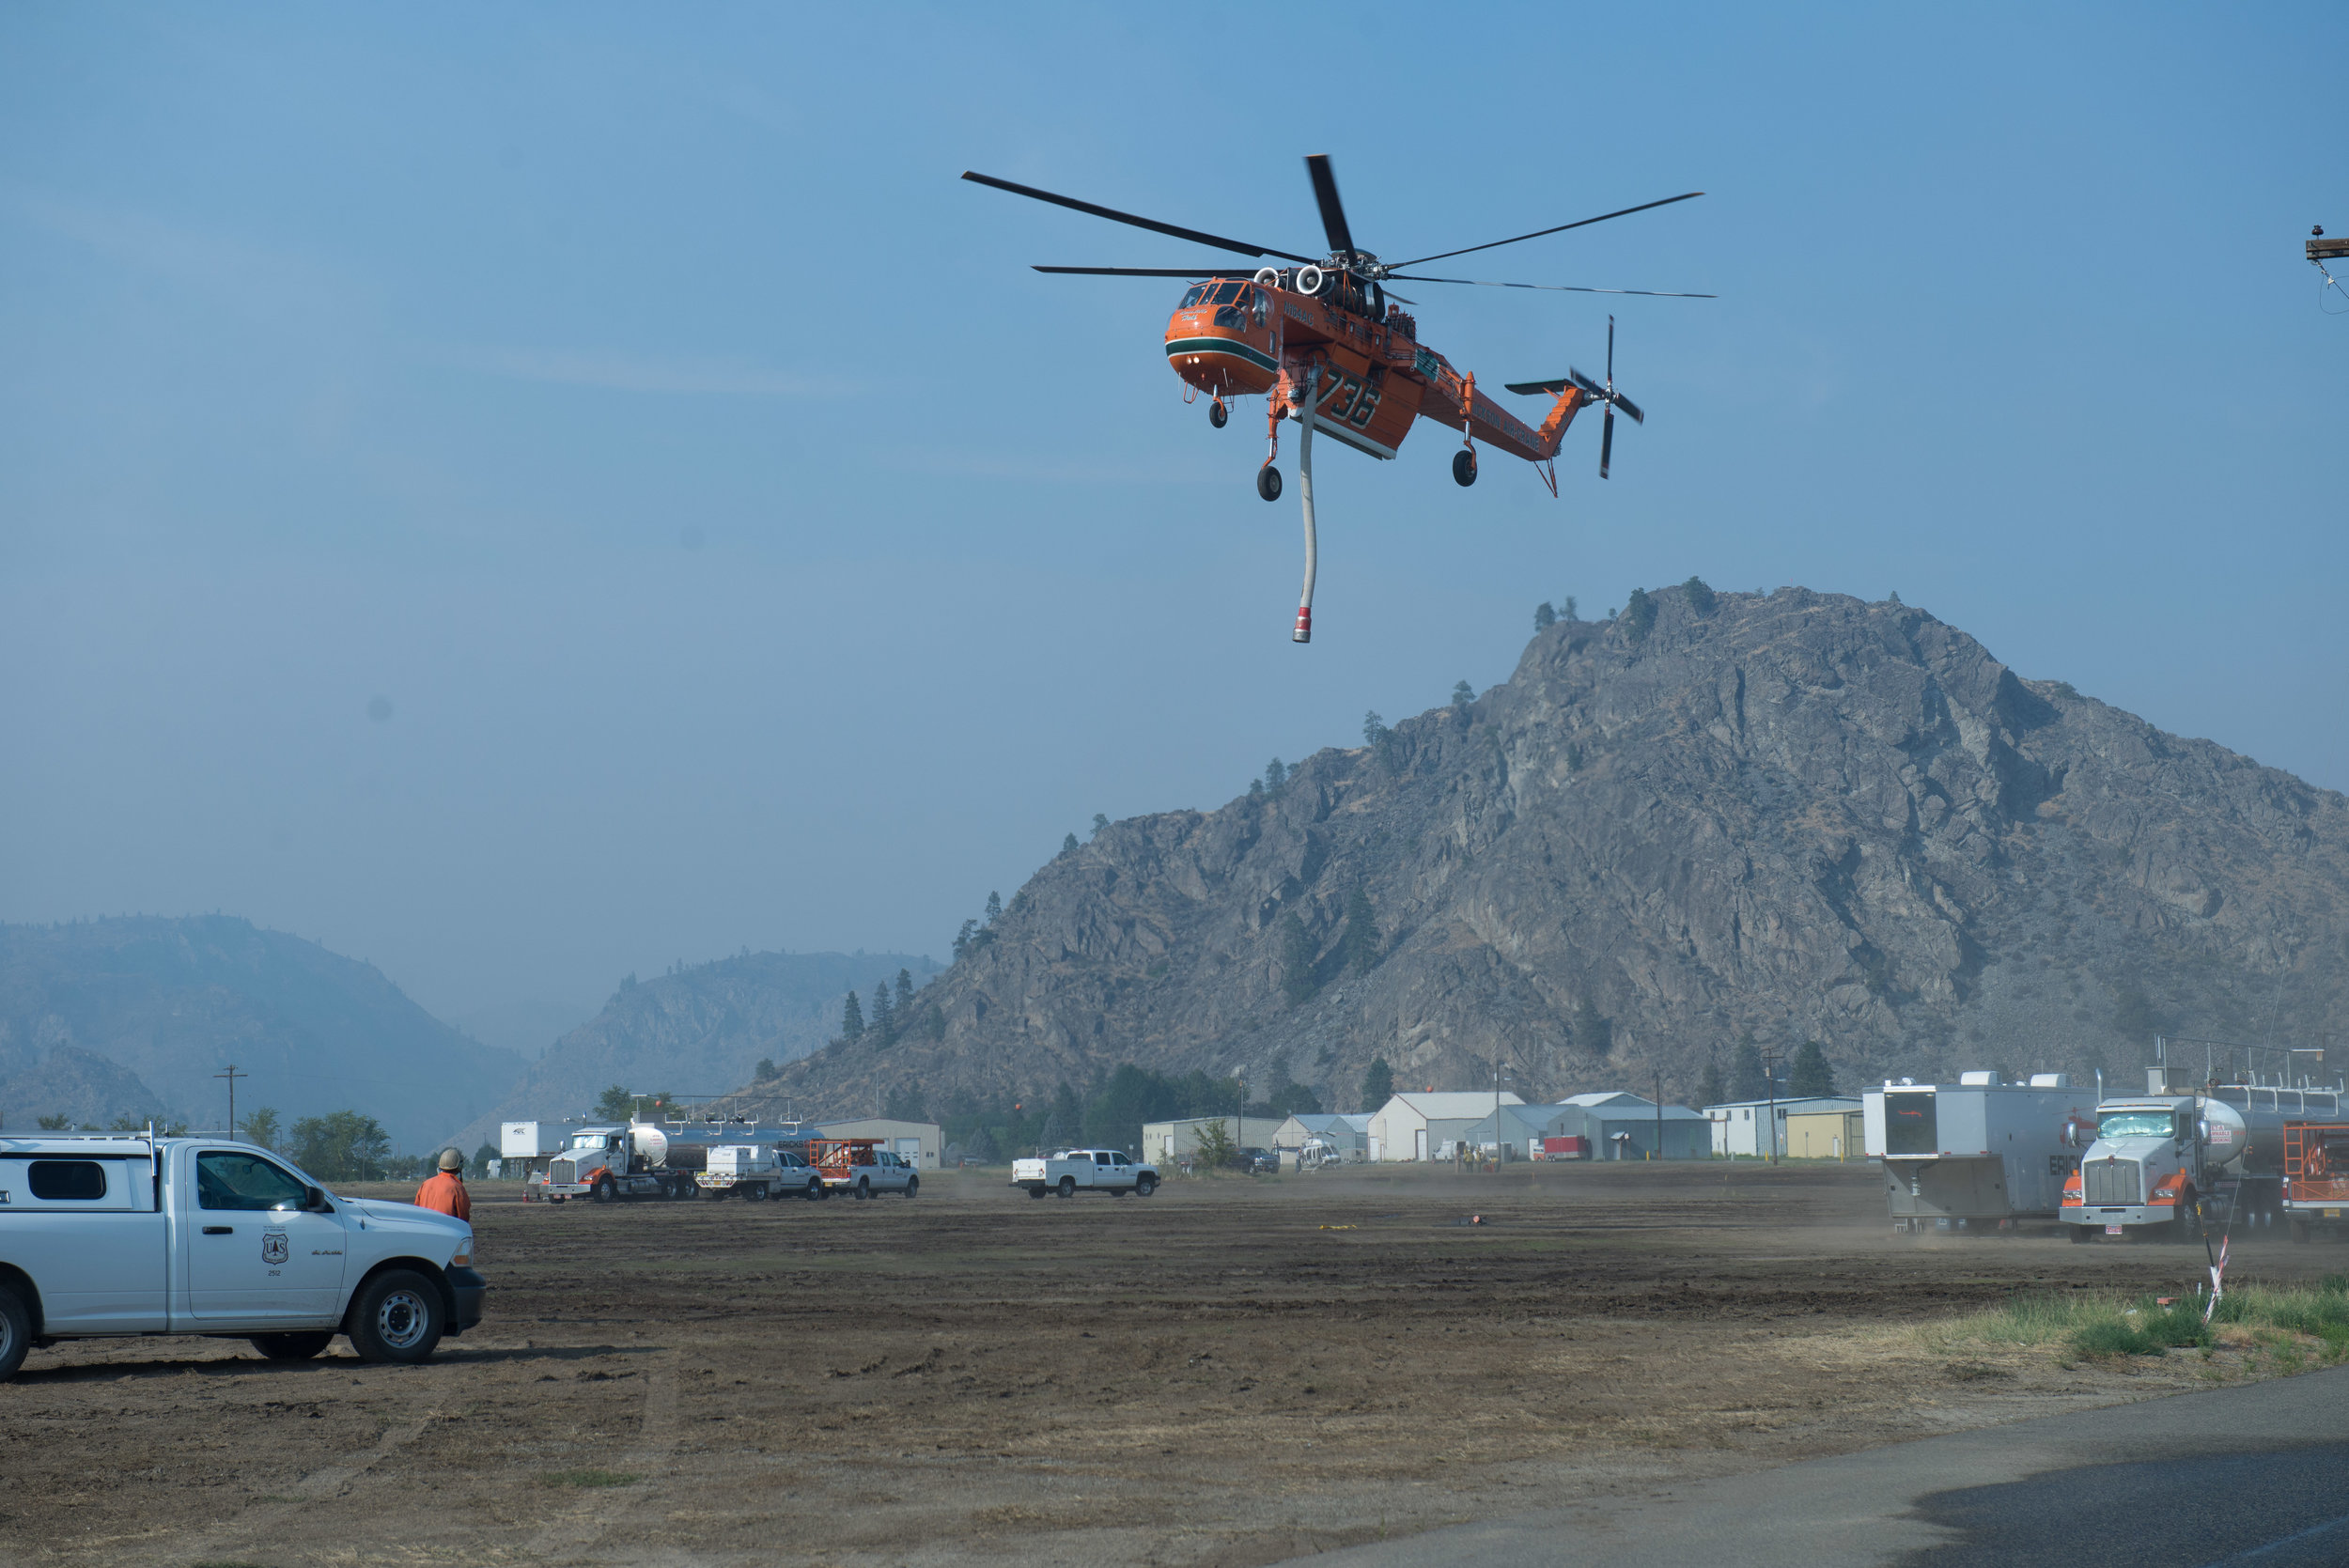  "Incredible Hulk", an Aircrane Helicopter operated by Erickson Aviation, lifts off from Lake Chelan Airport, Tuesday August 25, 2015. Commercial fire fighting has been crucial in containing fires throughout Washington State. 